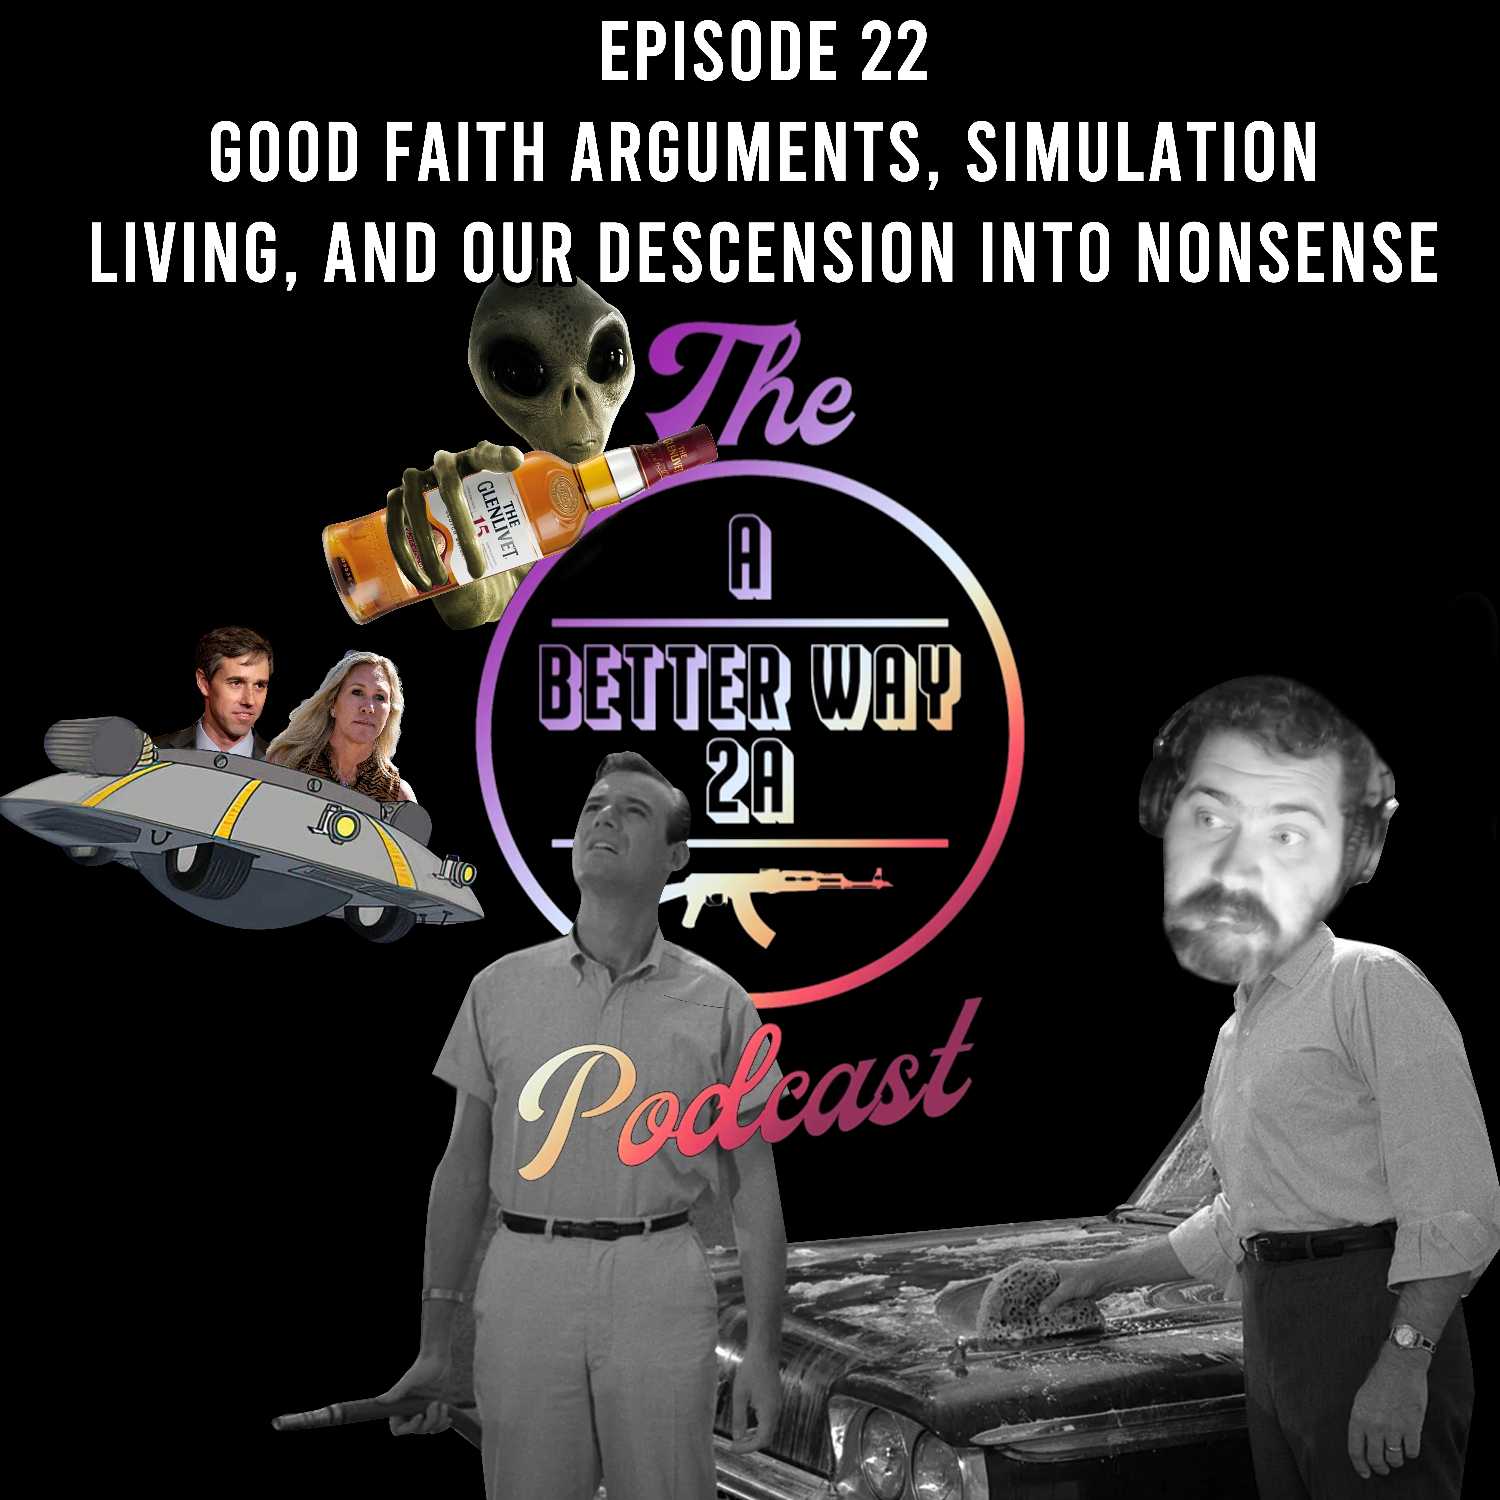 Episode 22 - Good Faith Arguments, Simulation Living, and our Descension into Nonsense